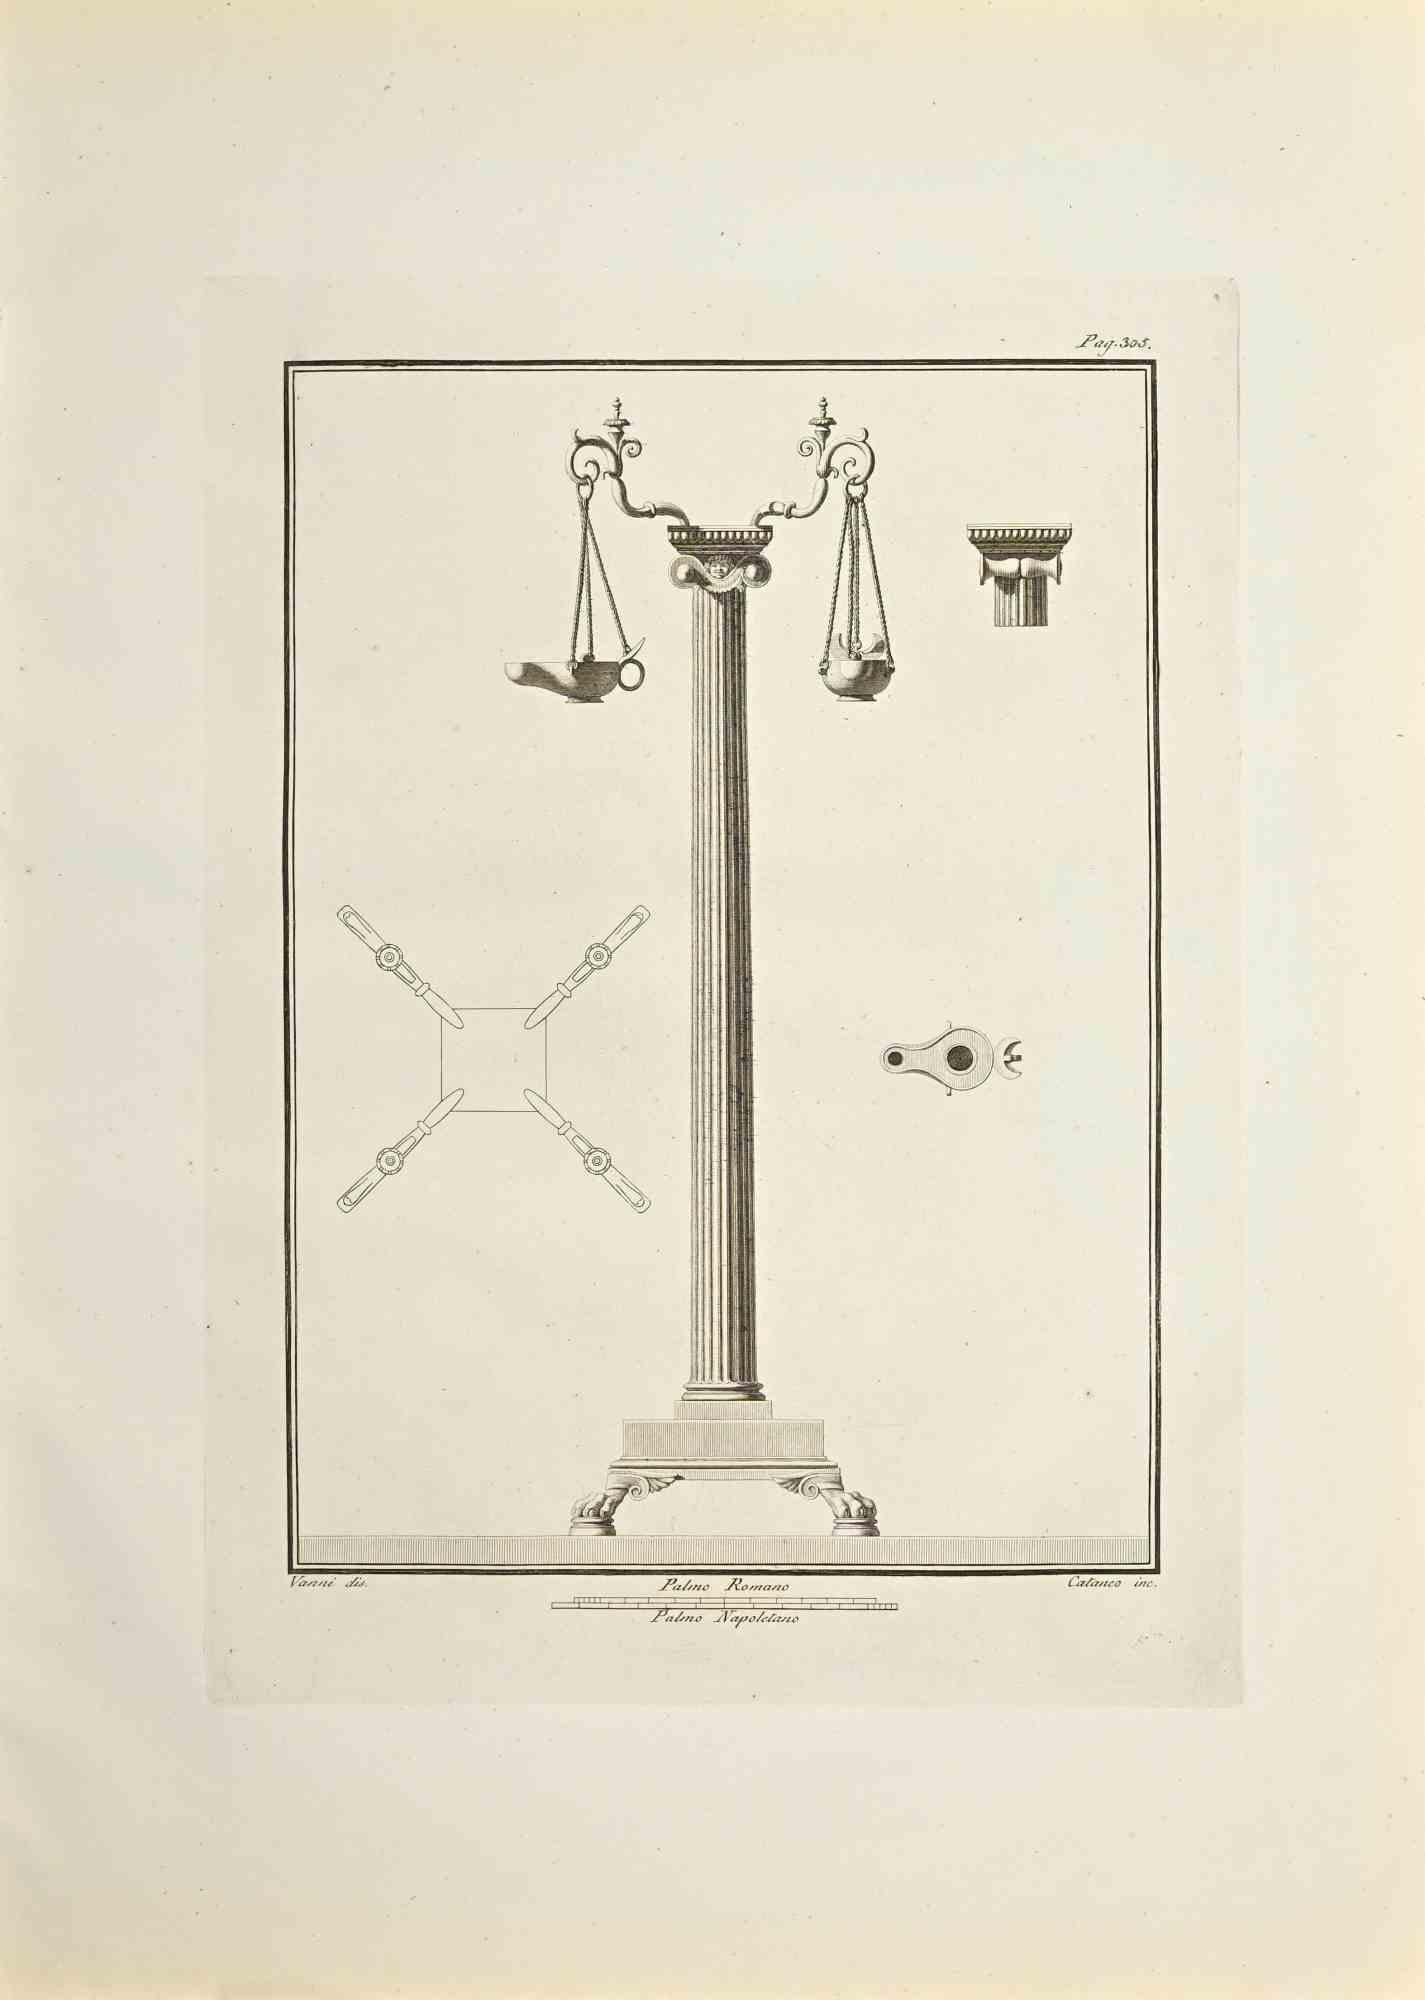 Oil Lamp is an Etching realized by Aniello Cataneo (1732-1805).

Good conditions.

The etching belongs to the print suite “Antiquities of Herculaneum Exposed” (original title: “Le Antichità di Ercolano Esposte”), an eight-volume volume of engravings